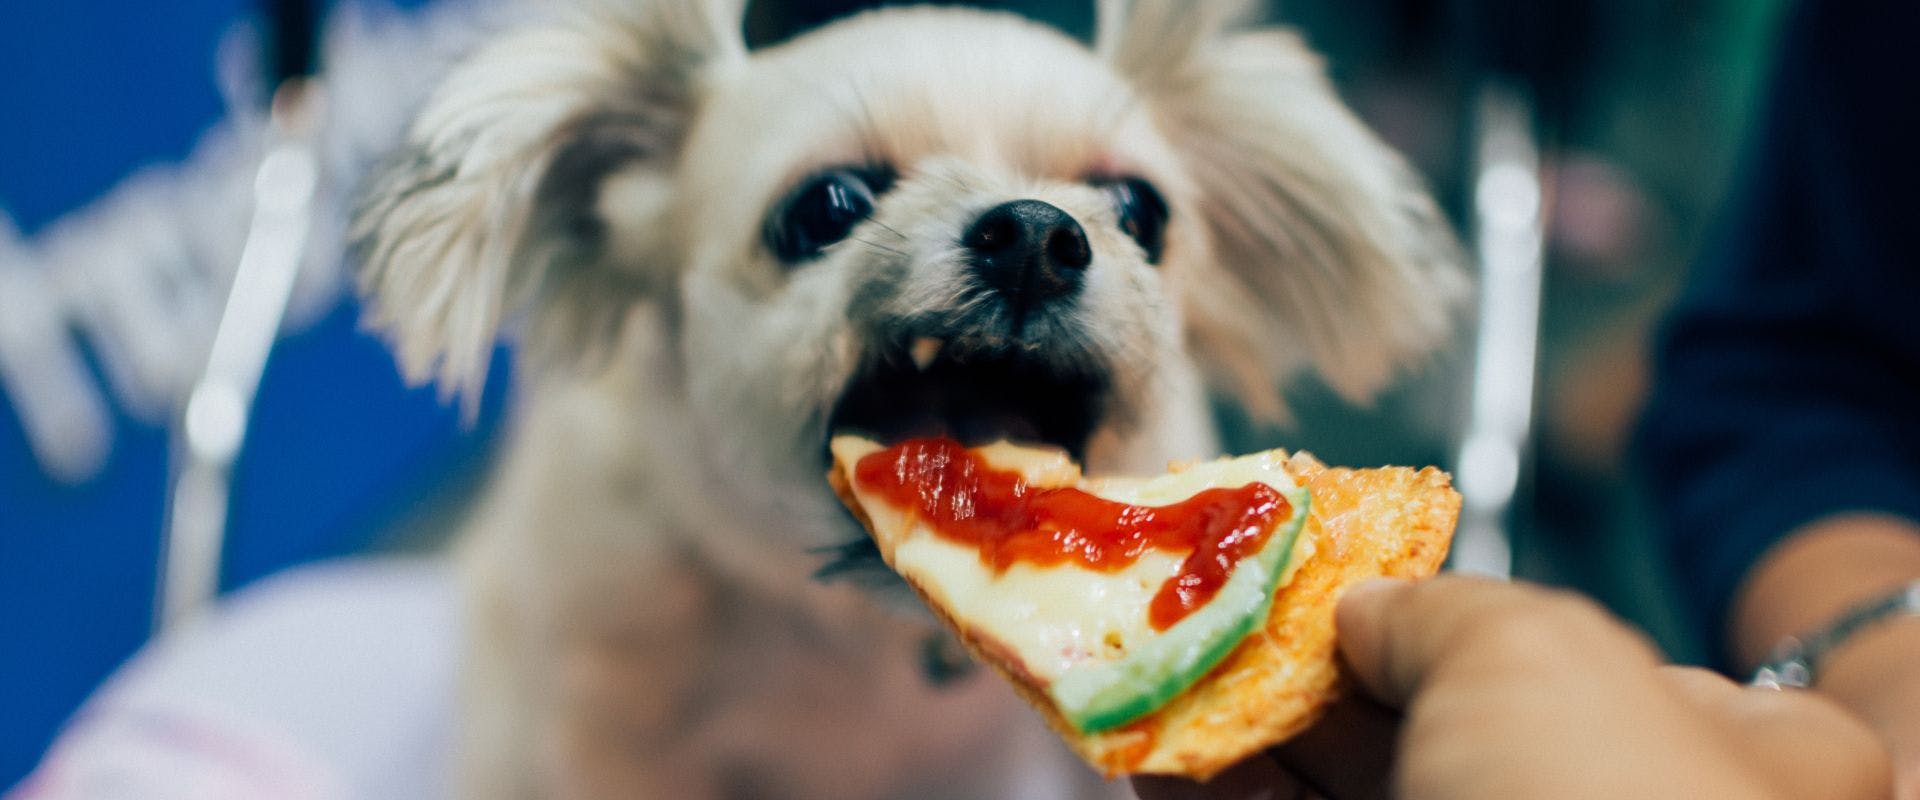 Small dog eating pizza